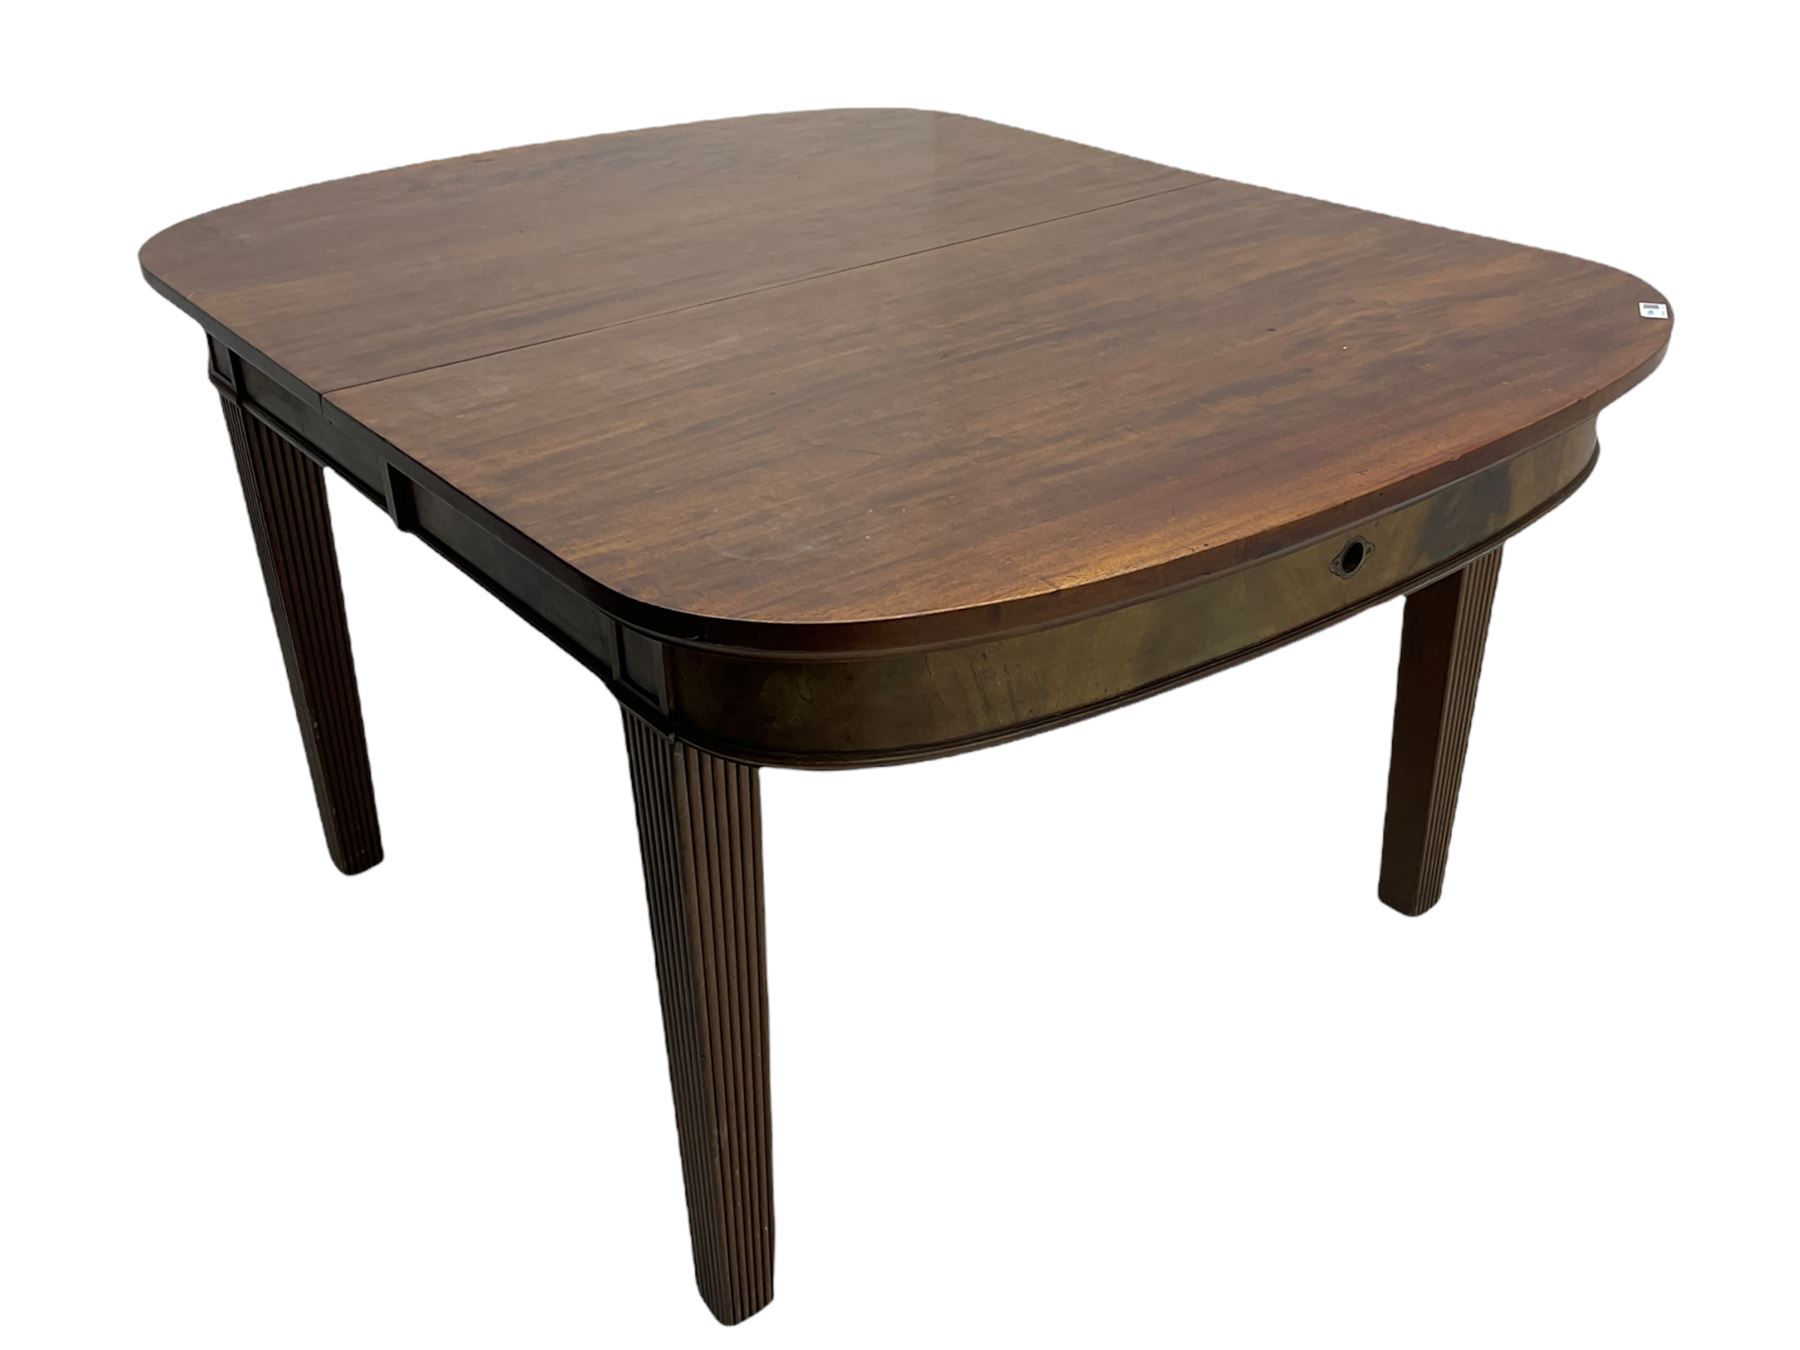 19th century mahogany extending dining table with leaf - Image 5 of 11